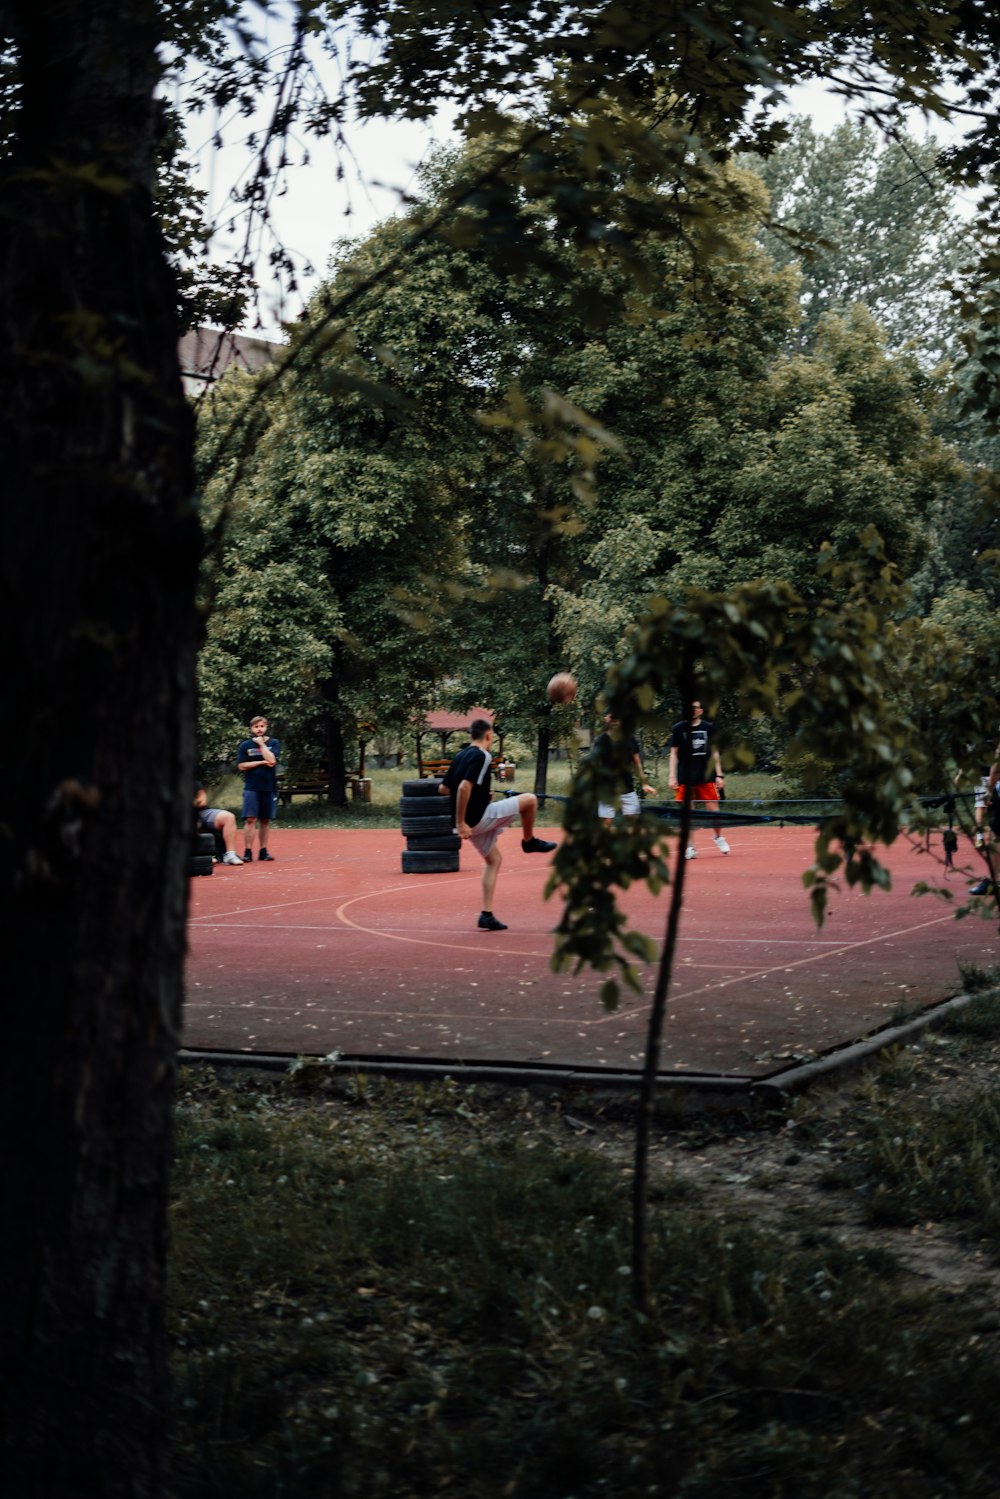 a group of people playing a game of basketball